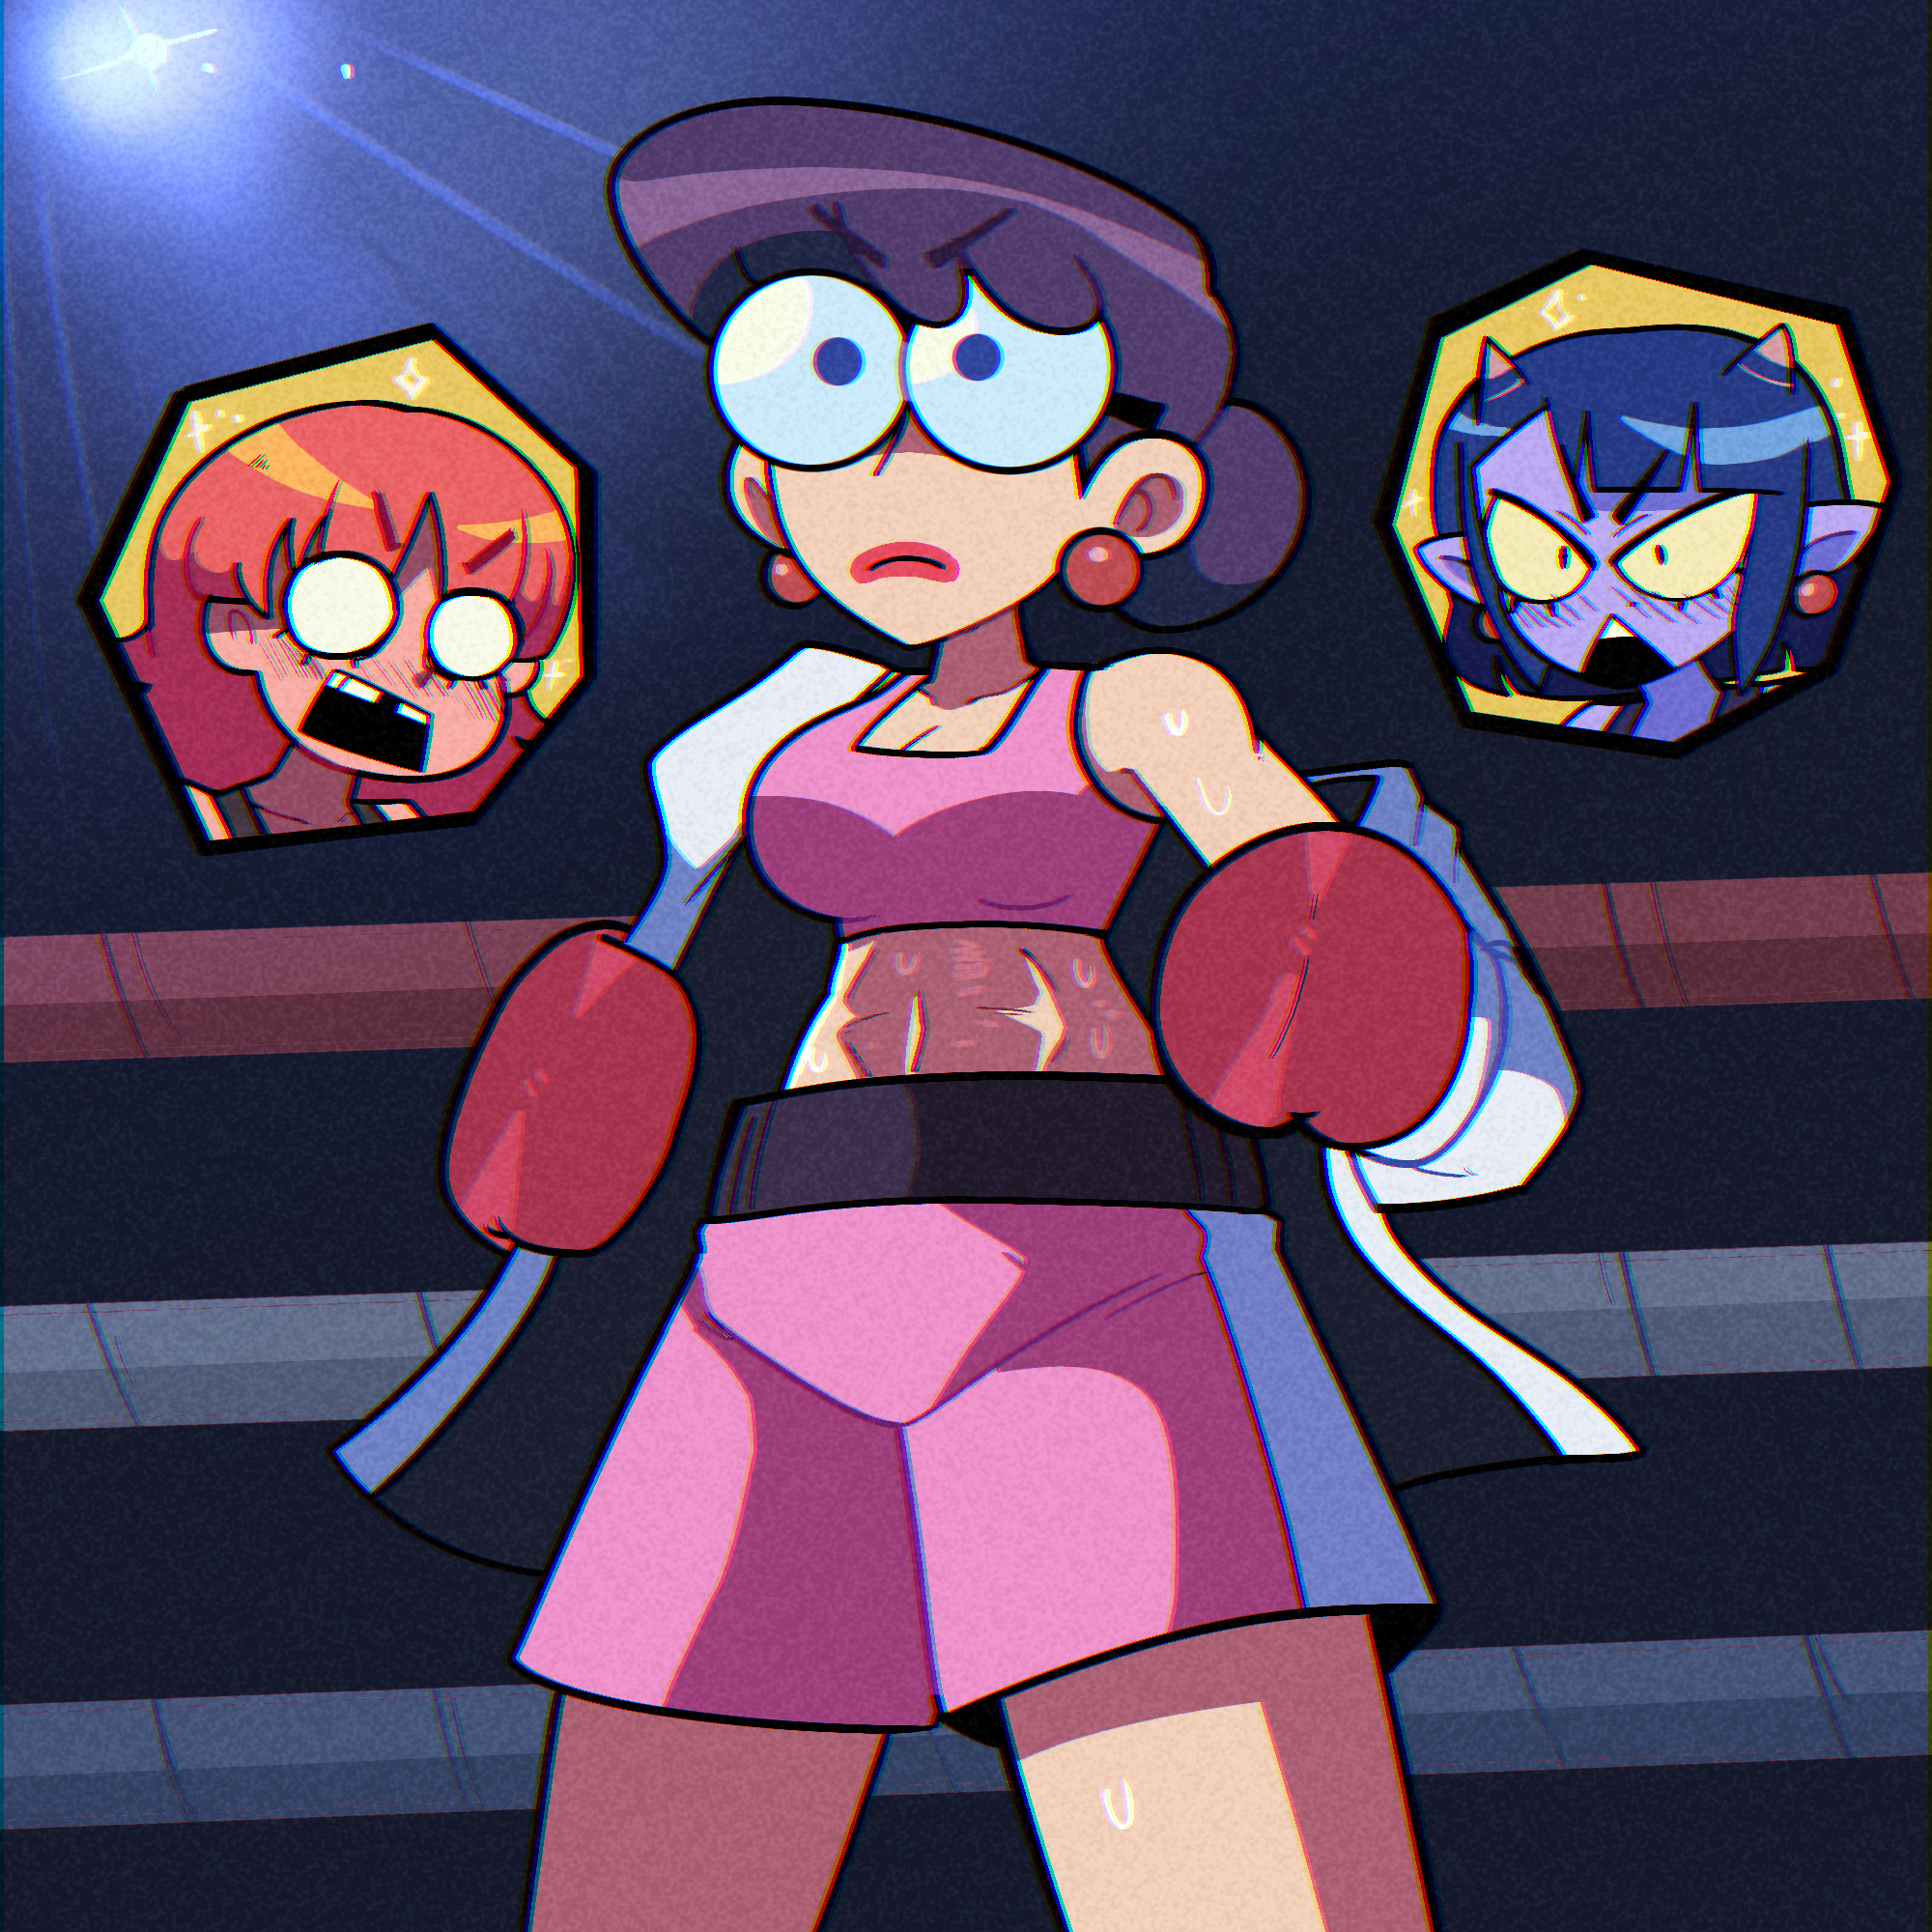 Another punch punch forever art I forgor to post by jinmessan on Newgrounds